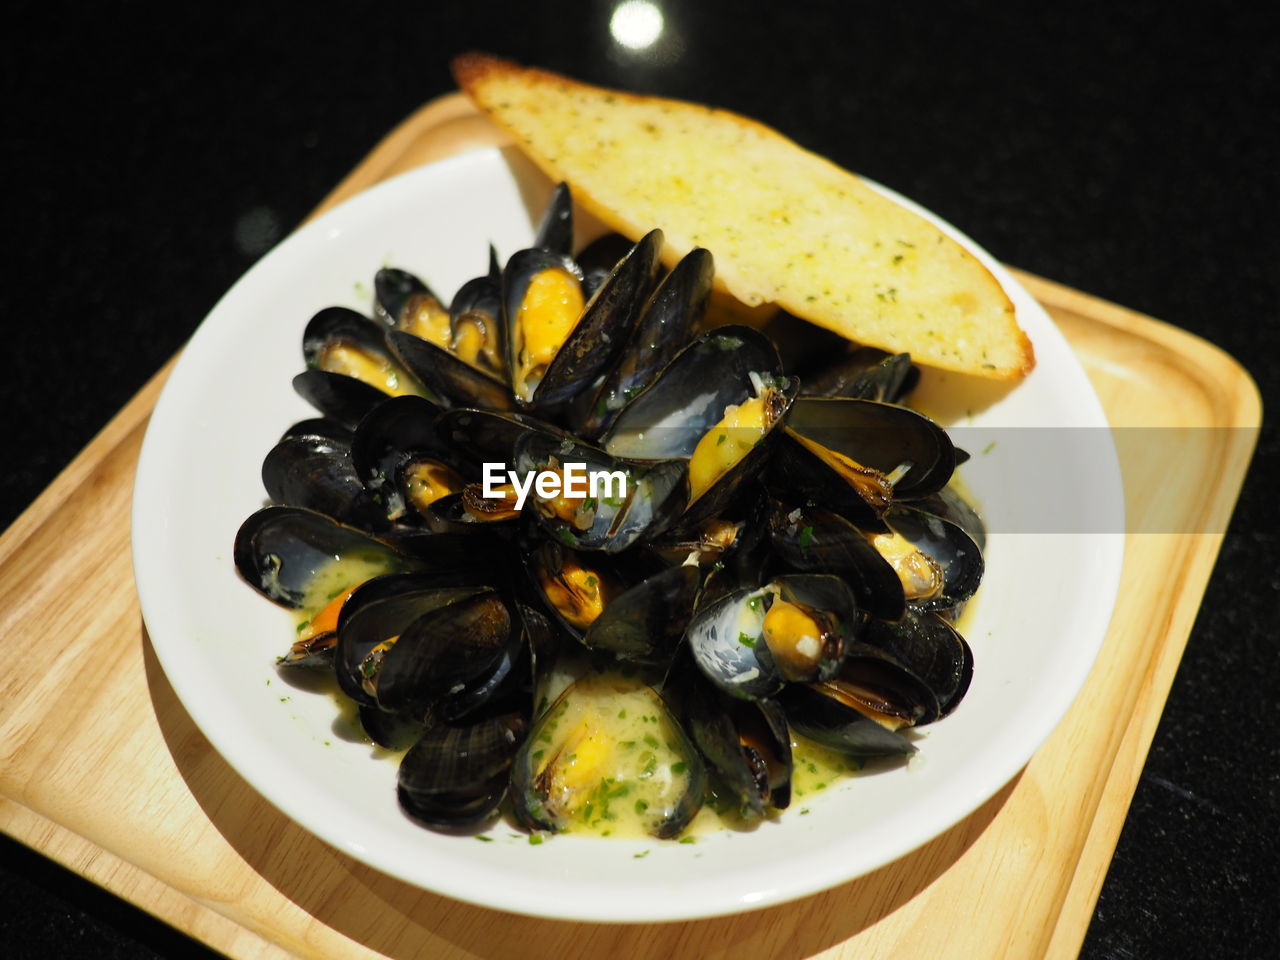 Baked mussels with cheese and garlic bread are placed on a plate.